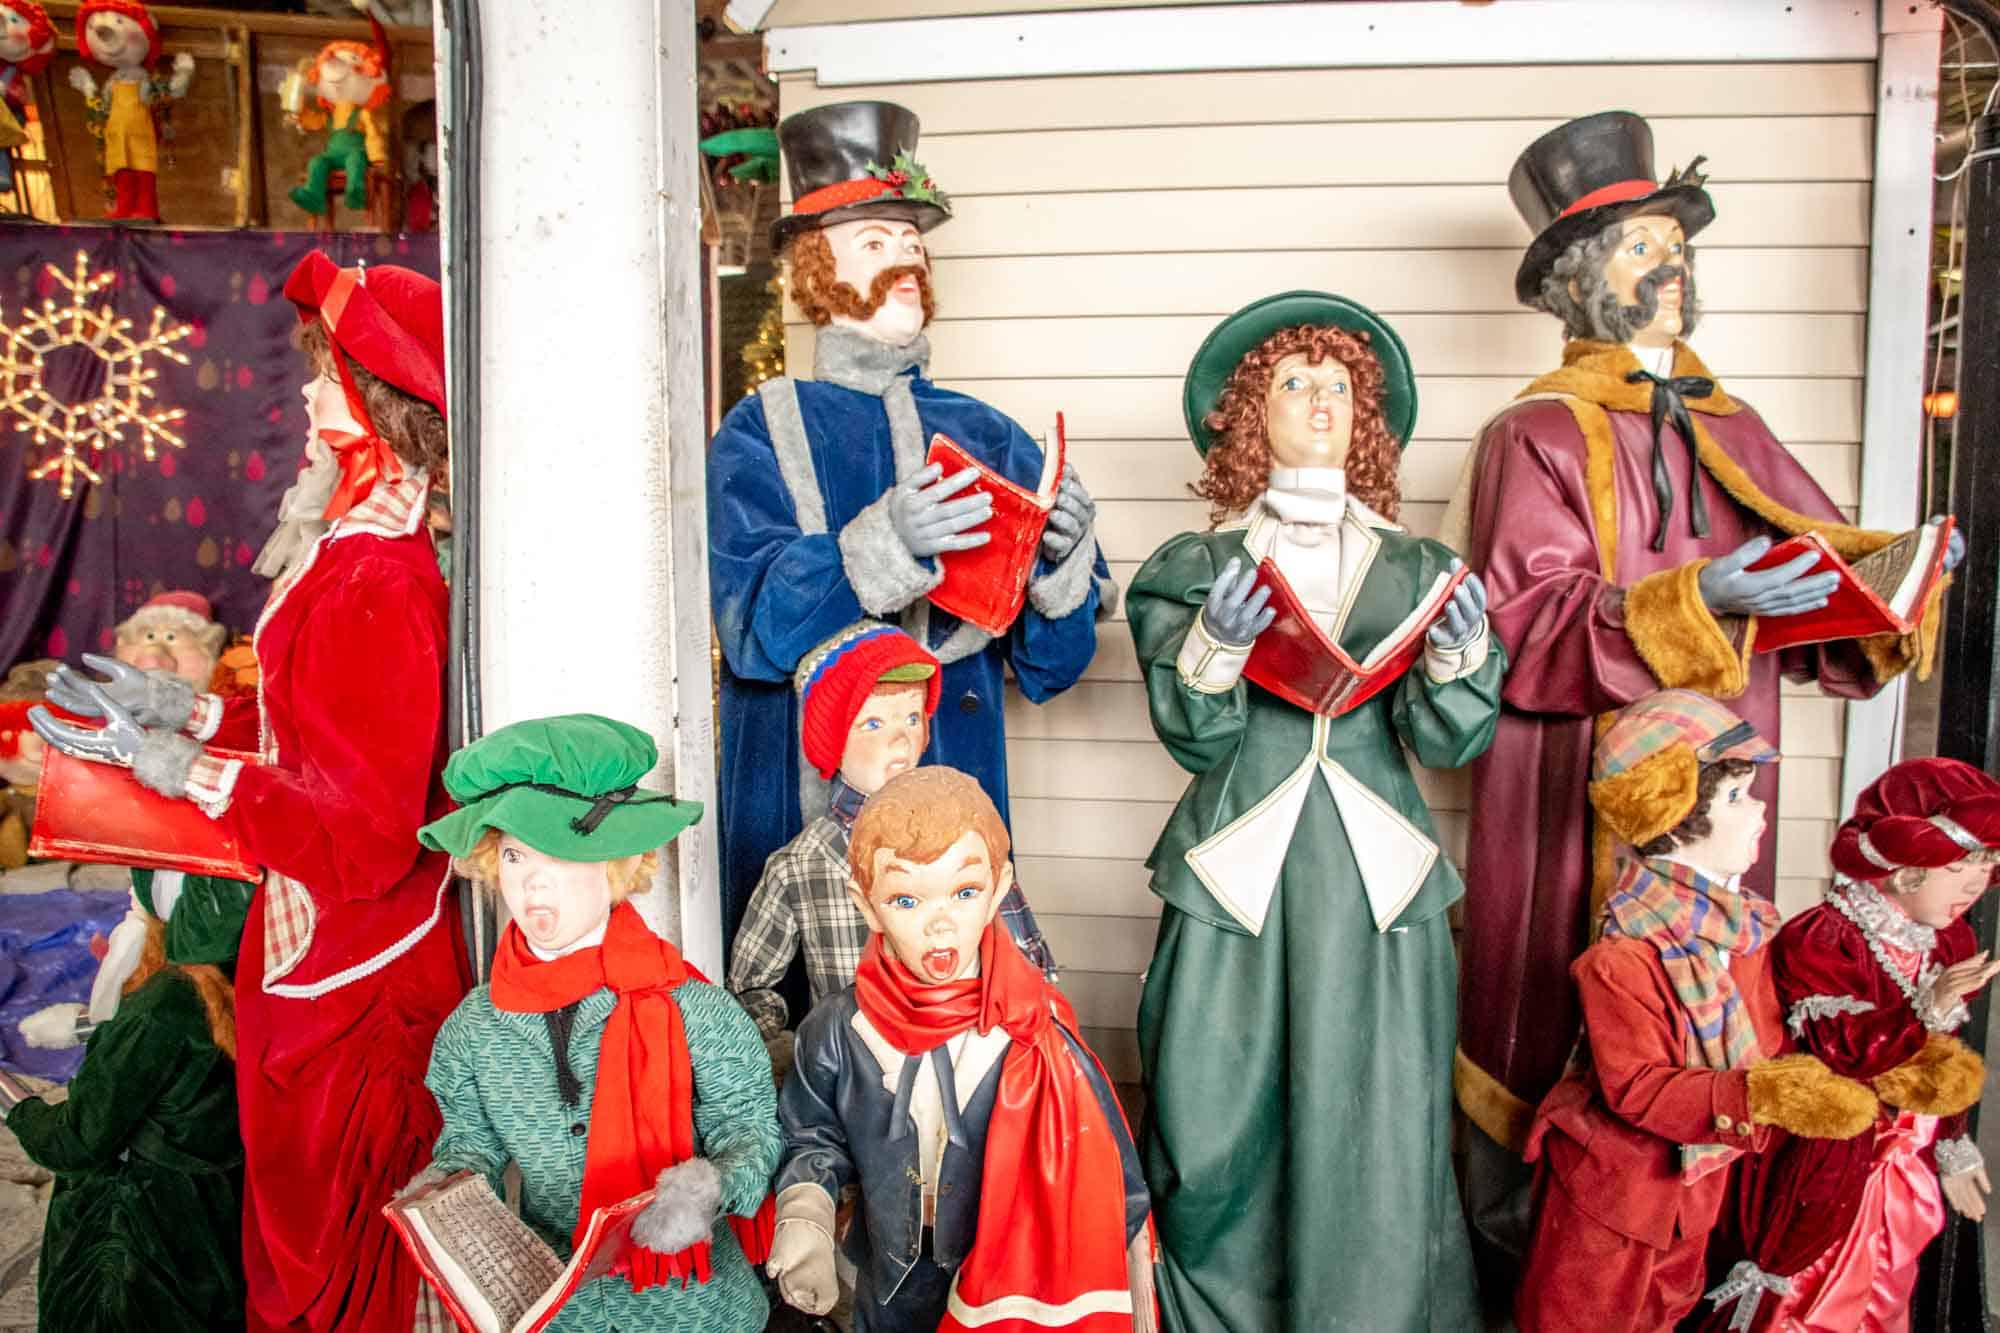 Animatronic Christmas carolers in Victorian-style dress